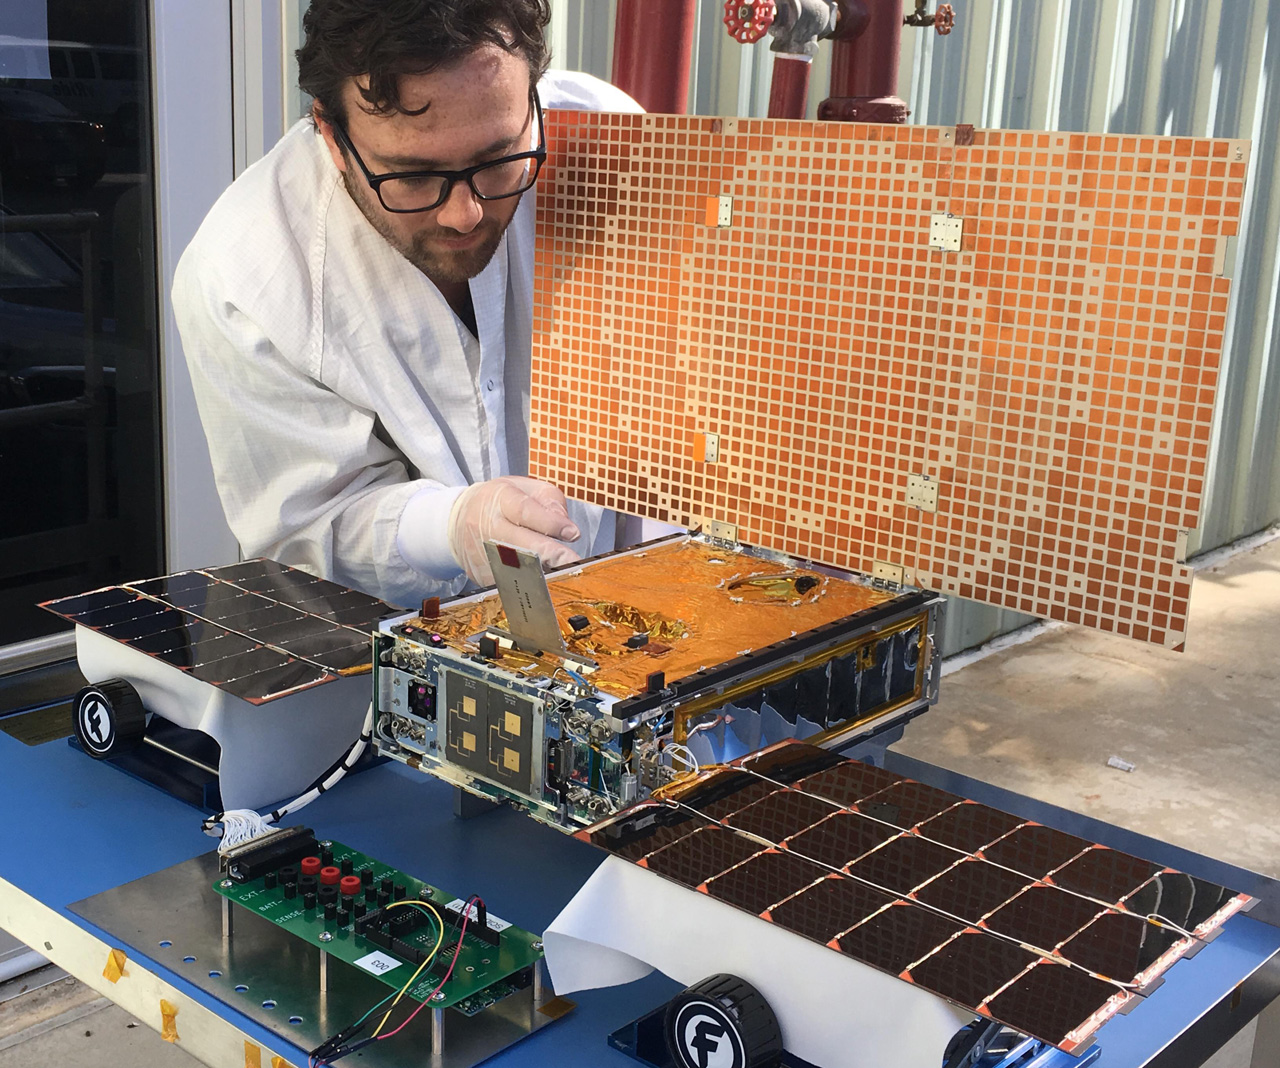 Engineer with MarCO spacecraft.